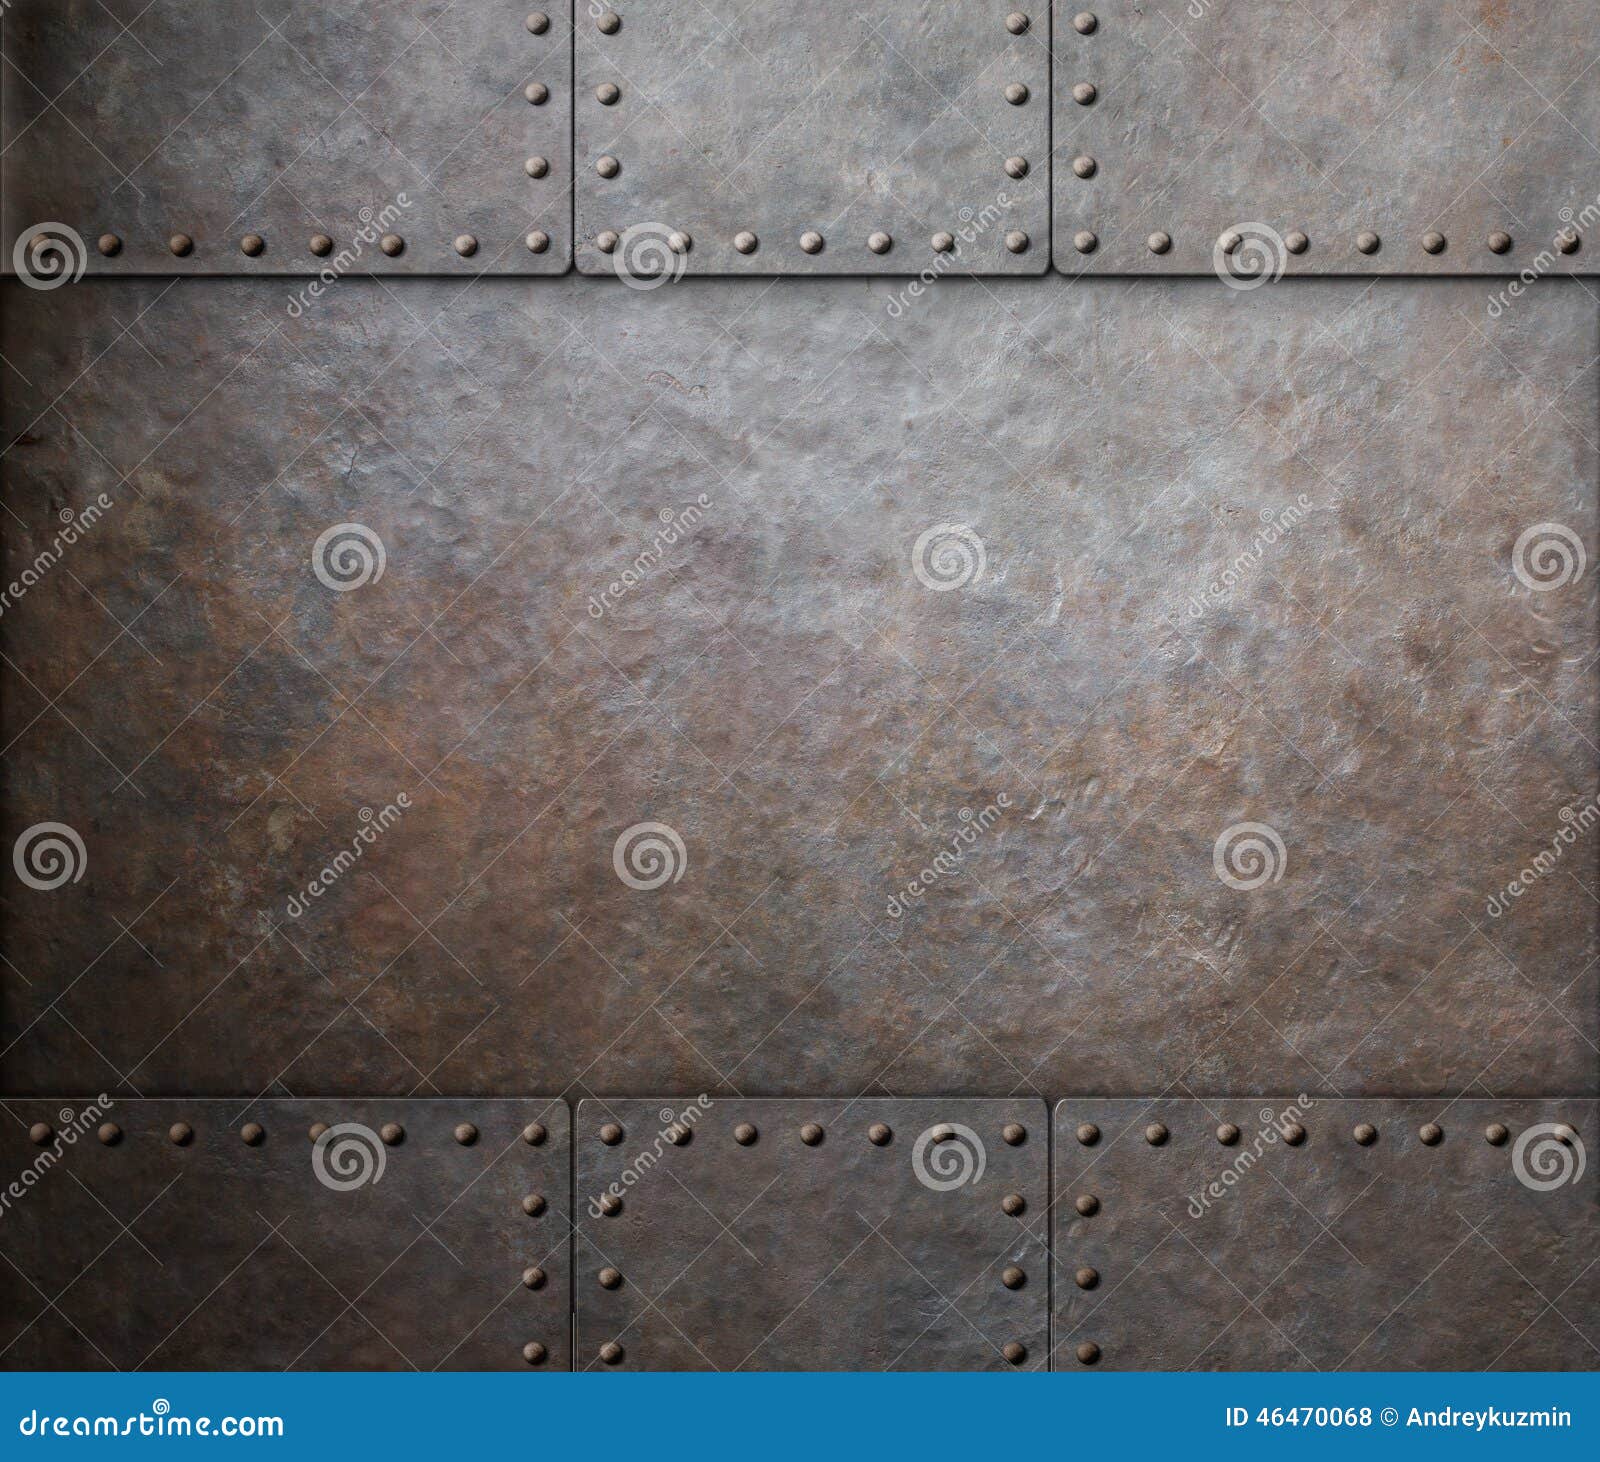 rust steel metal texture with rivets as steam punk